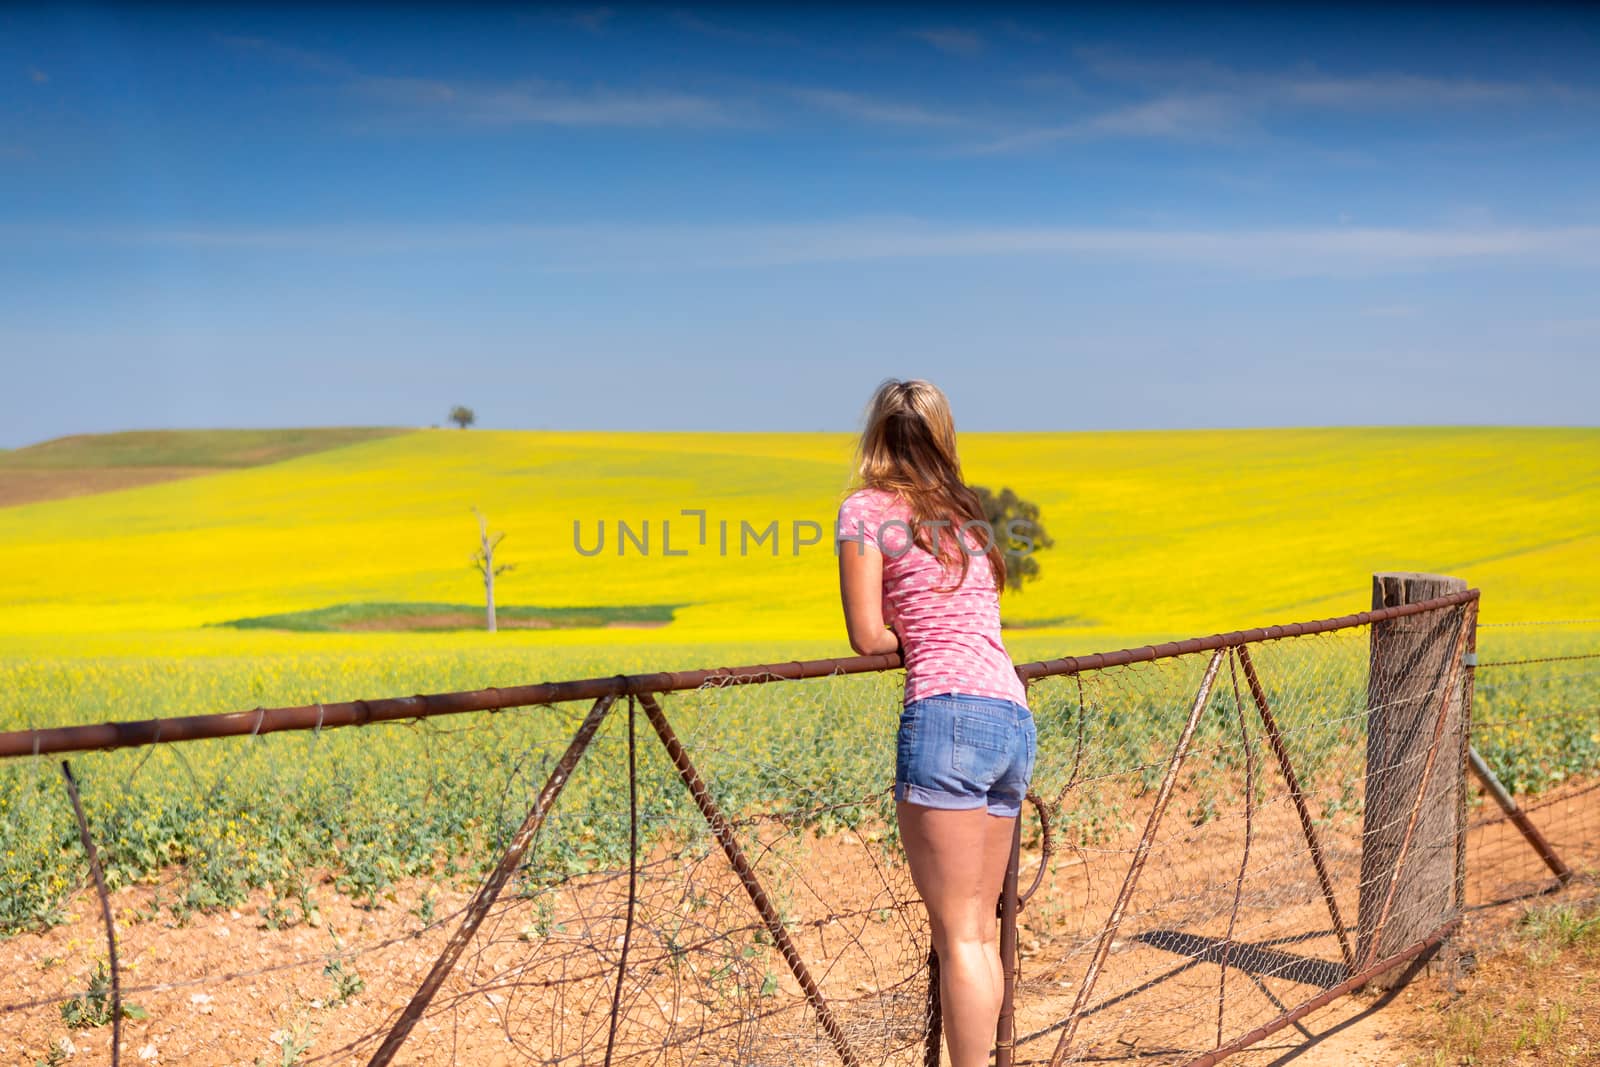 Leaning on farm gate looking out over rural countryside rolling hills of golden canola crops under a pretty blue spring sky. Shallow depth of field with focus to girl, space for copy